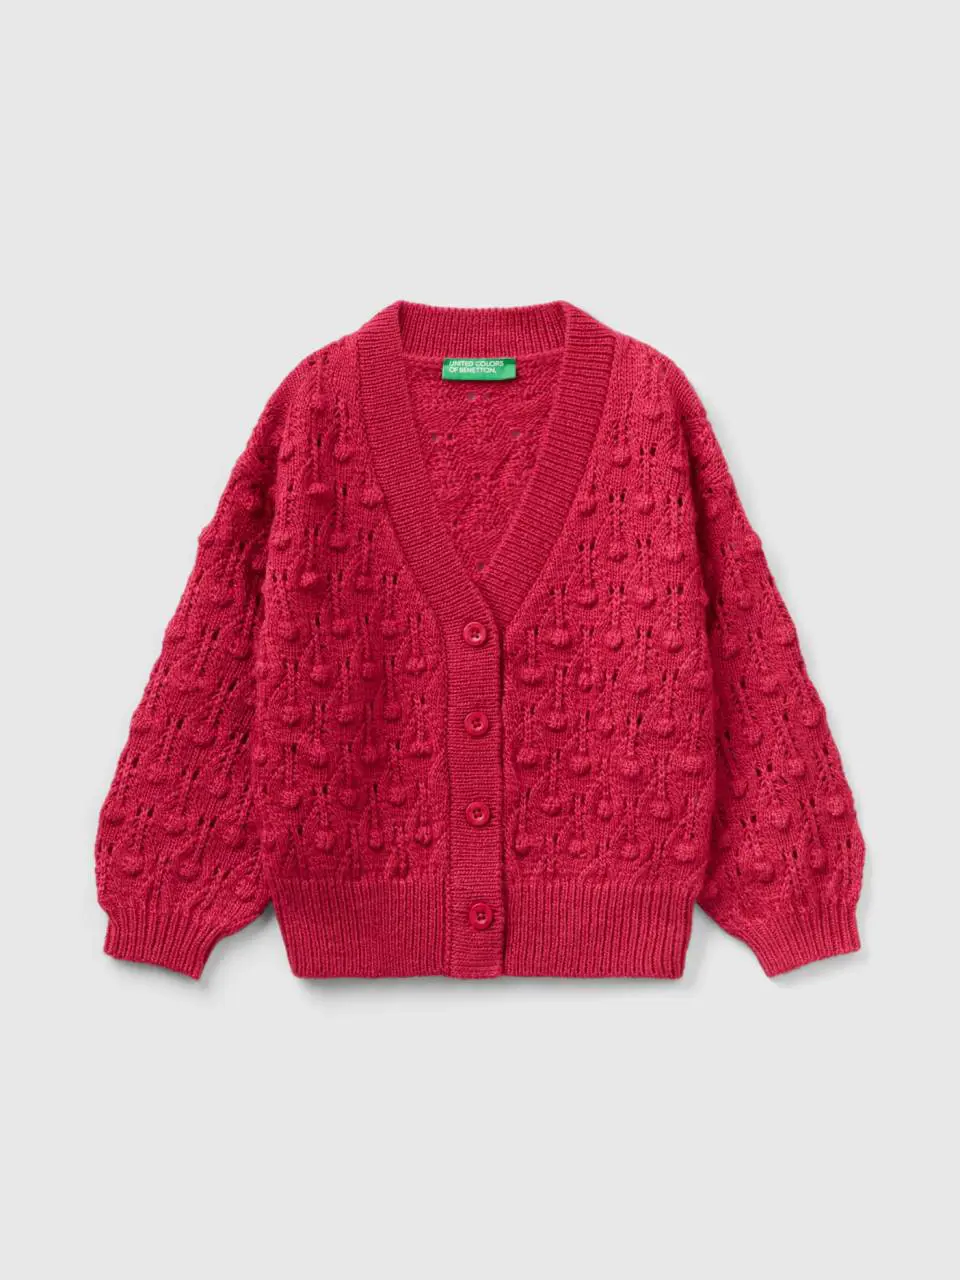 Benetton knit cardigan with buttons. 1